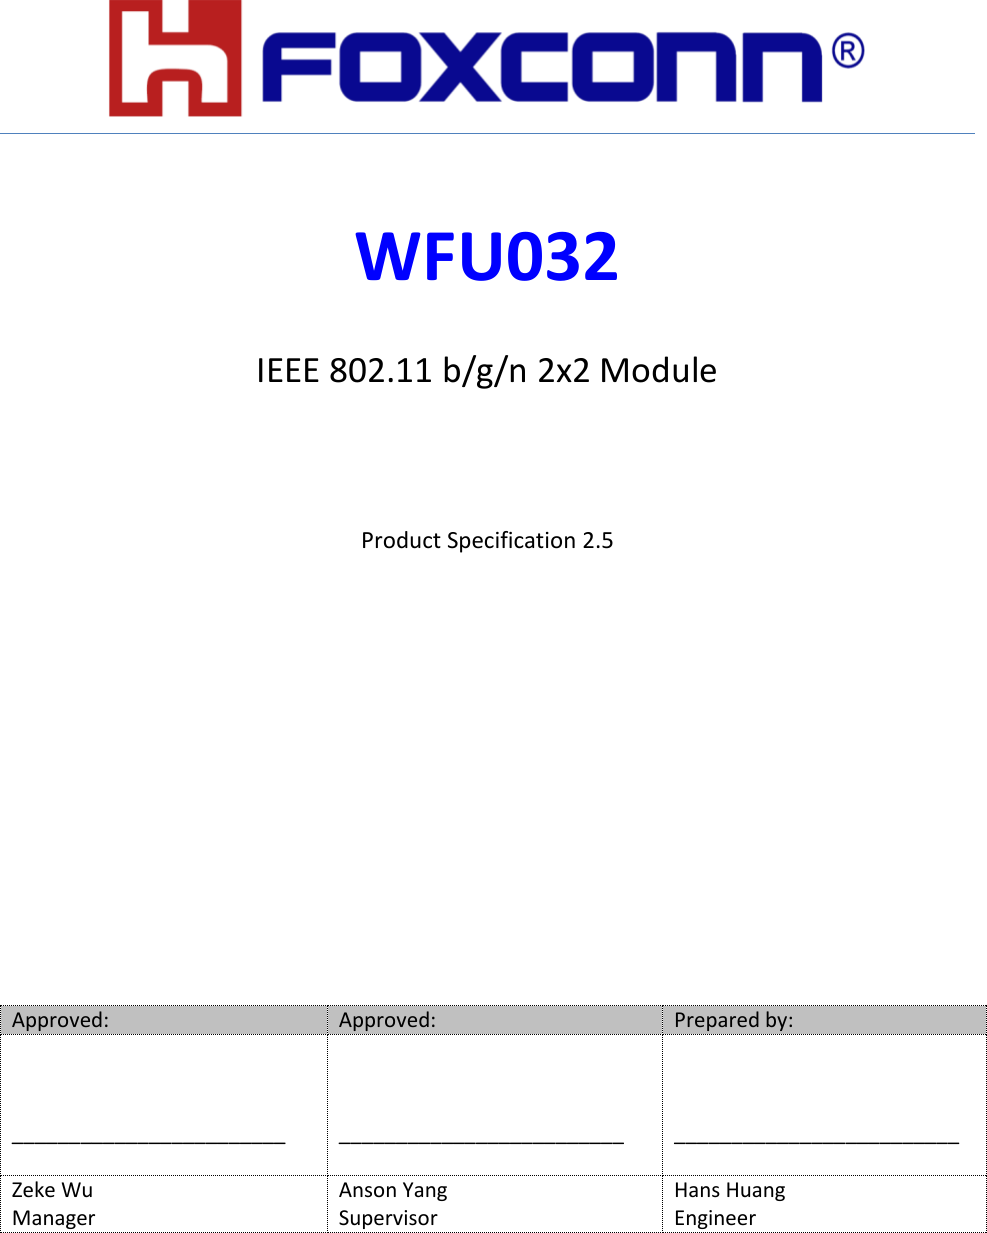           WFU032  IEEE 802.11 b/g/n 2x2 Module   Product Specification 2.5         Approved: Approved: Prepared by:    ________________________     _________________________    _________________________ Zeke Wu Anson Yang Hans Huang Manager Supervisor Engineer  